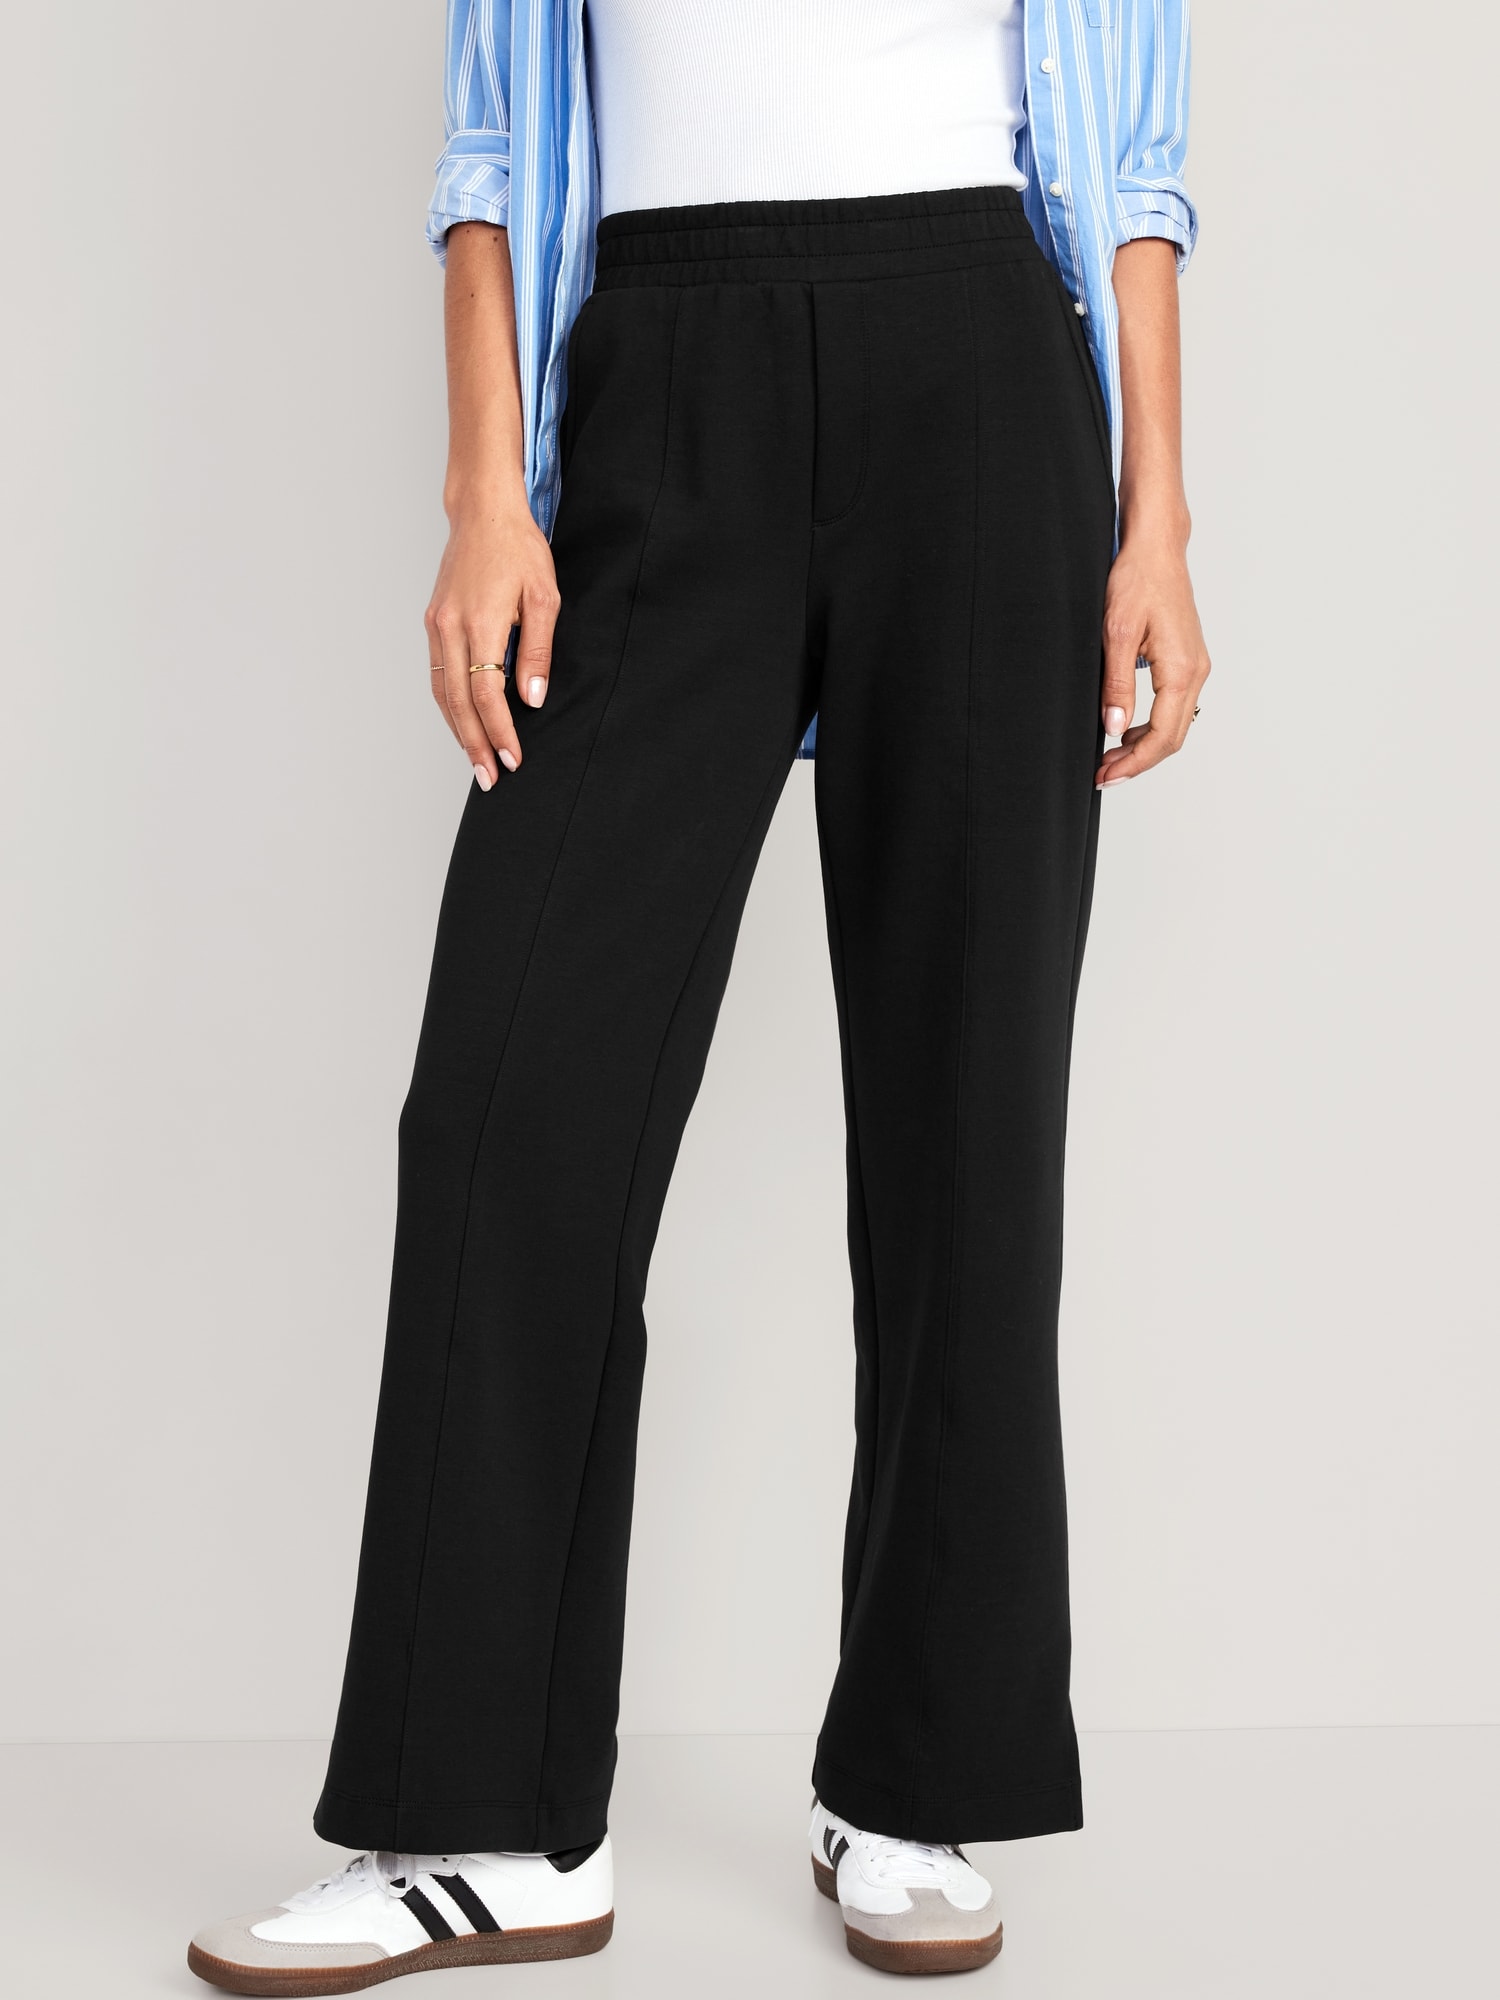 Comfortable Wide-Leg Pants From Old Navy